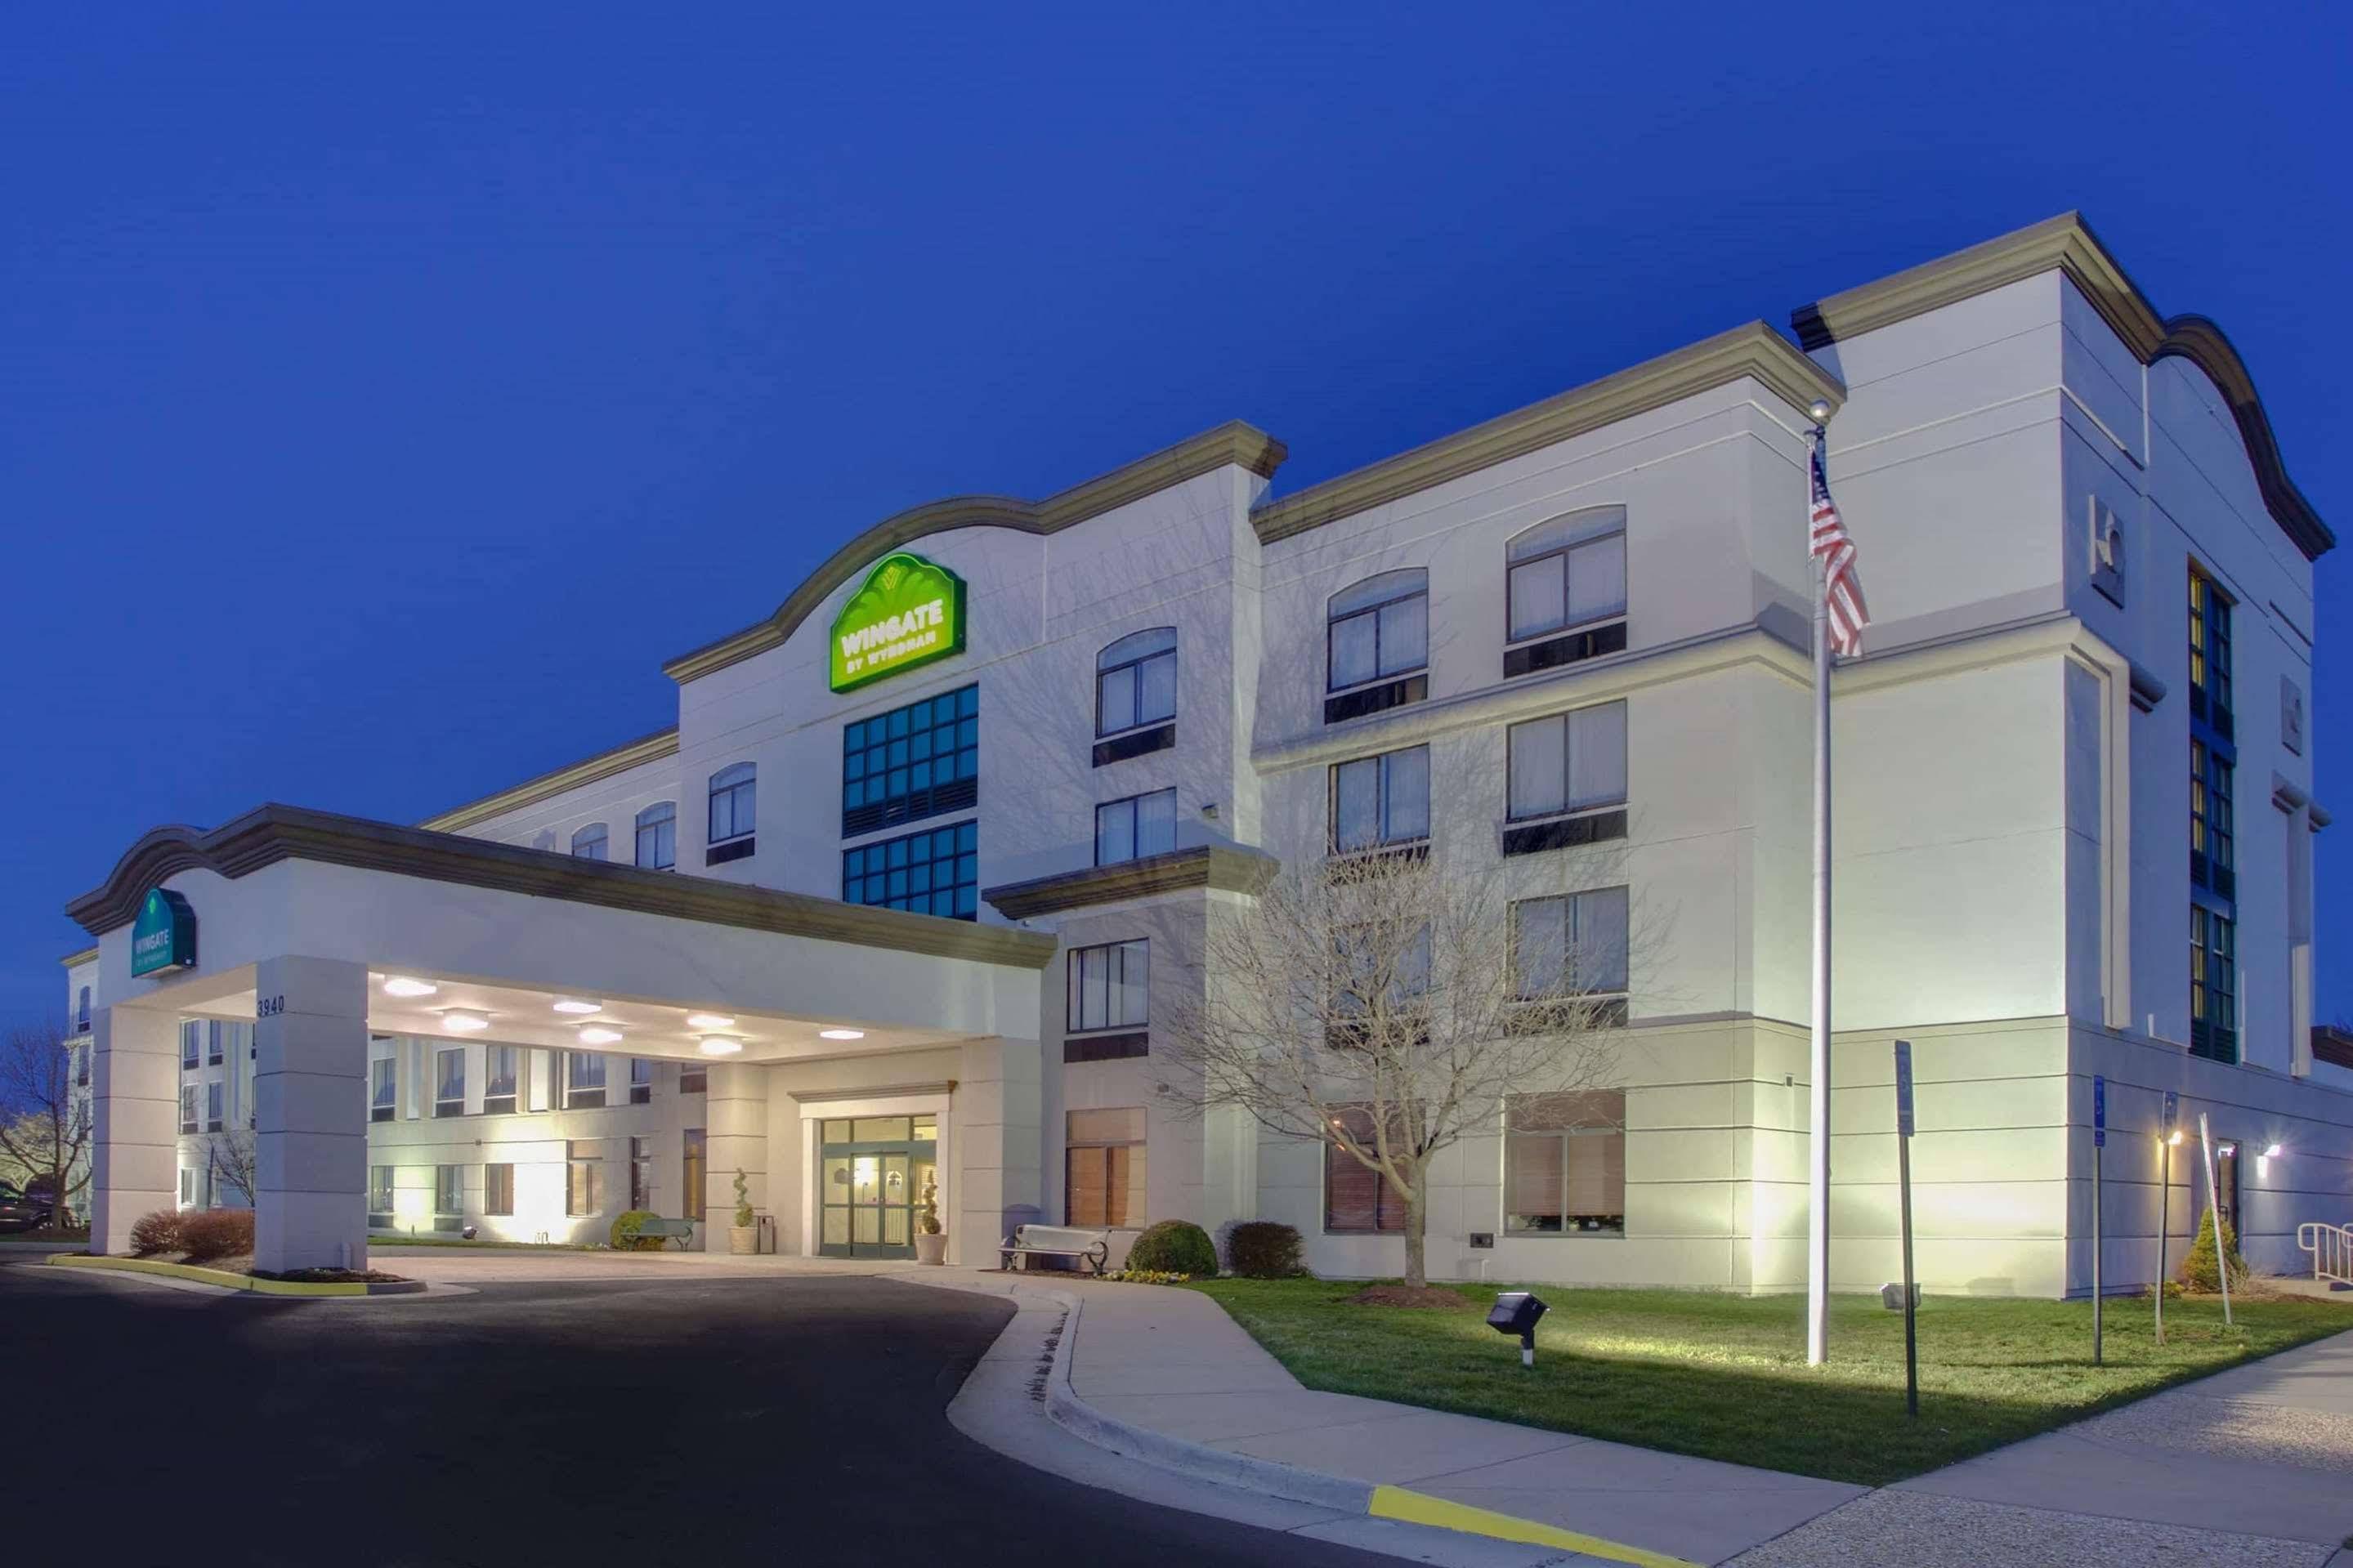 Wingate By Wyndham - Dulles International Hotel Chantilly Exterior foto